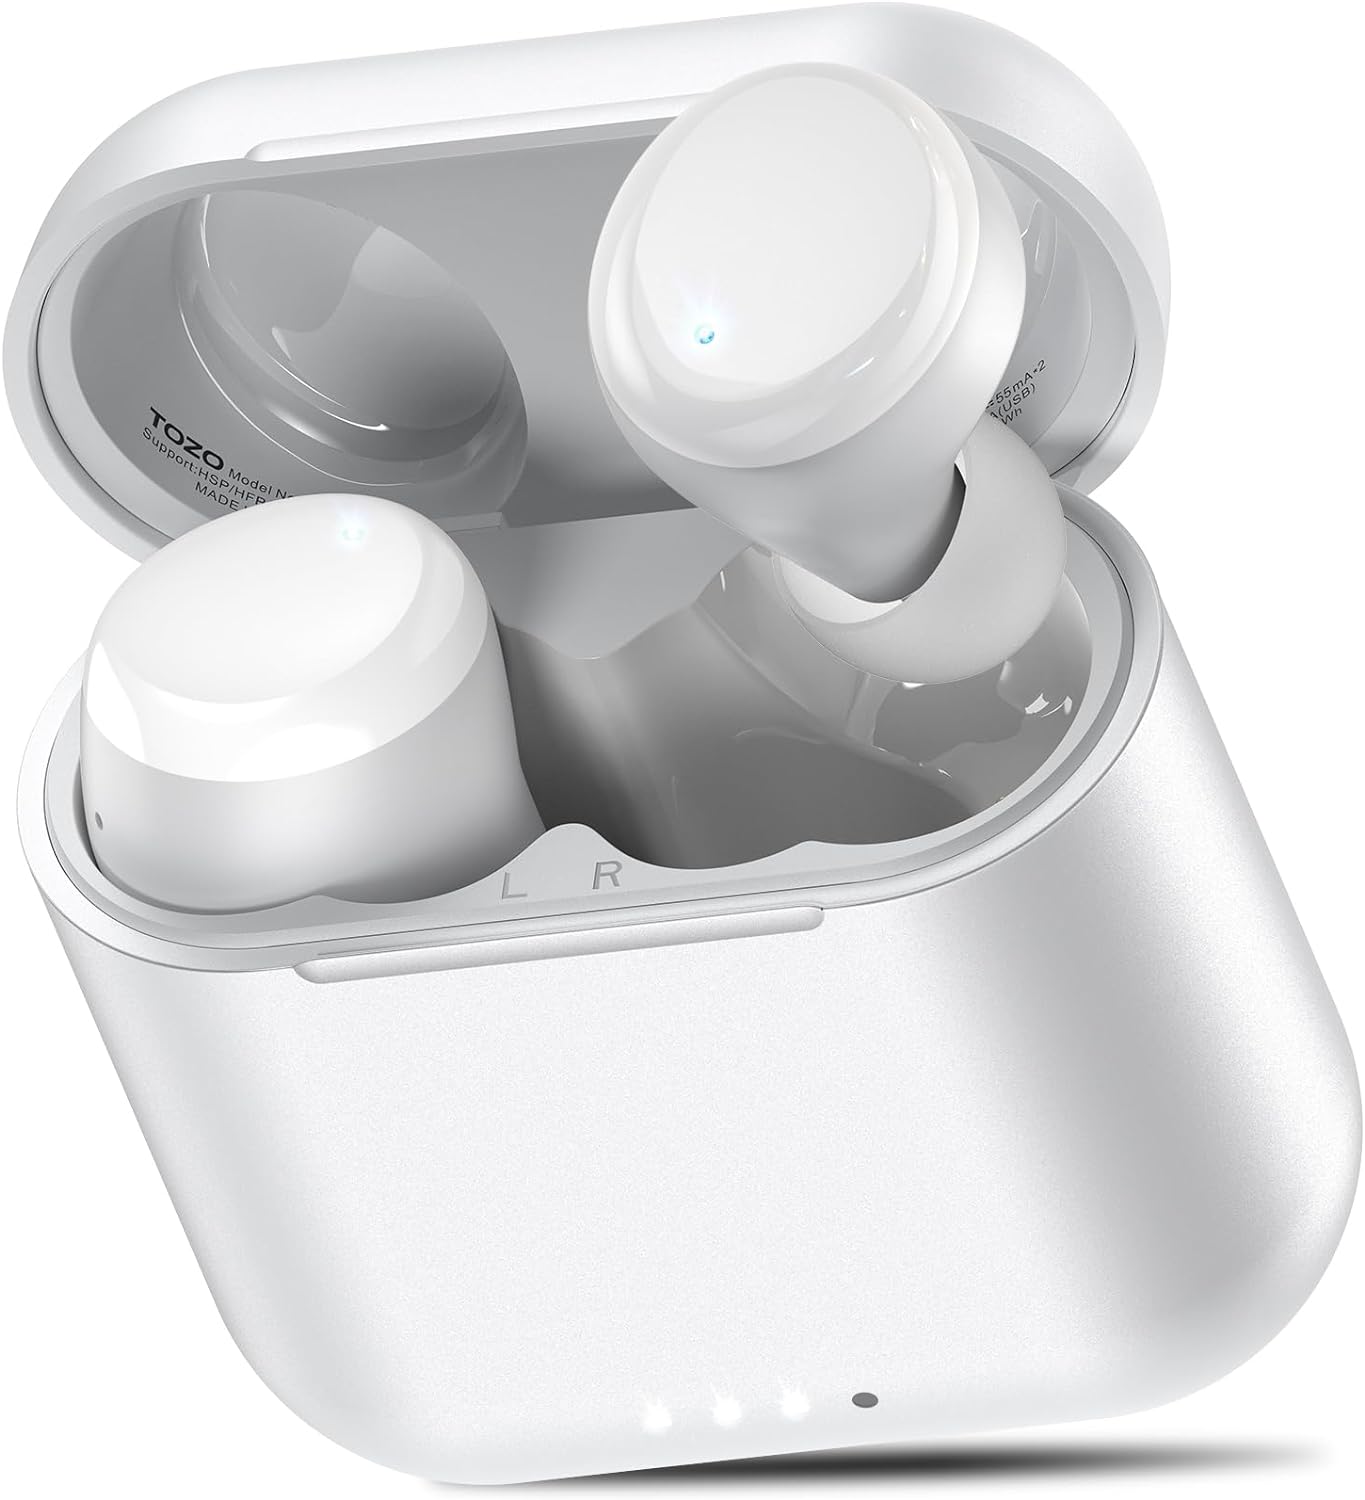 T6 Wireless Earbuds Bluetooth 5.3 Headphones, Ergonomic Design in-Ear Headset, 50Hrs Playtime with Wireless Charging Case, APP EQ Customisable, IPX8 Waterproof, New Upgraded Version